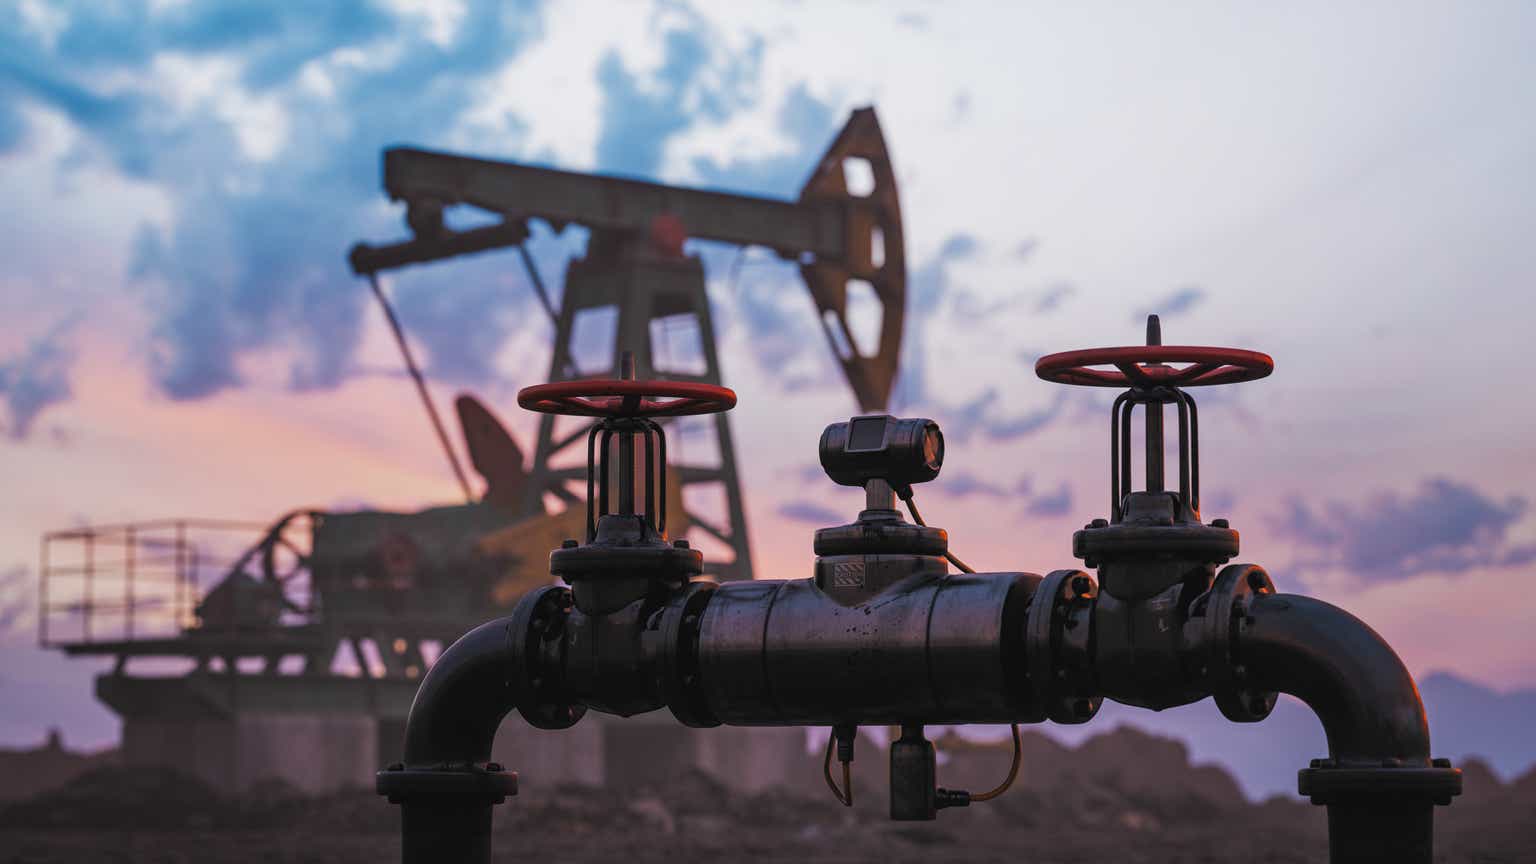 NexTier Oilfield Solutions: Discounted Valuation And Strong Outlook